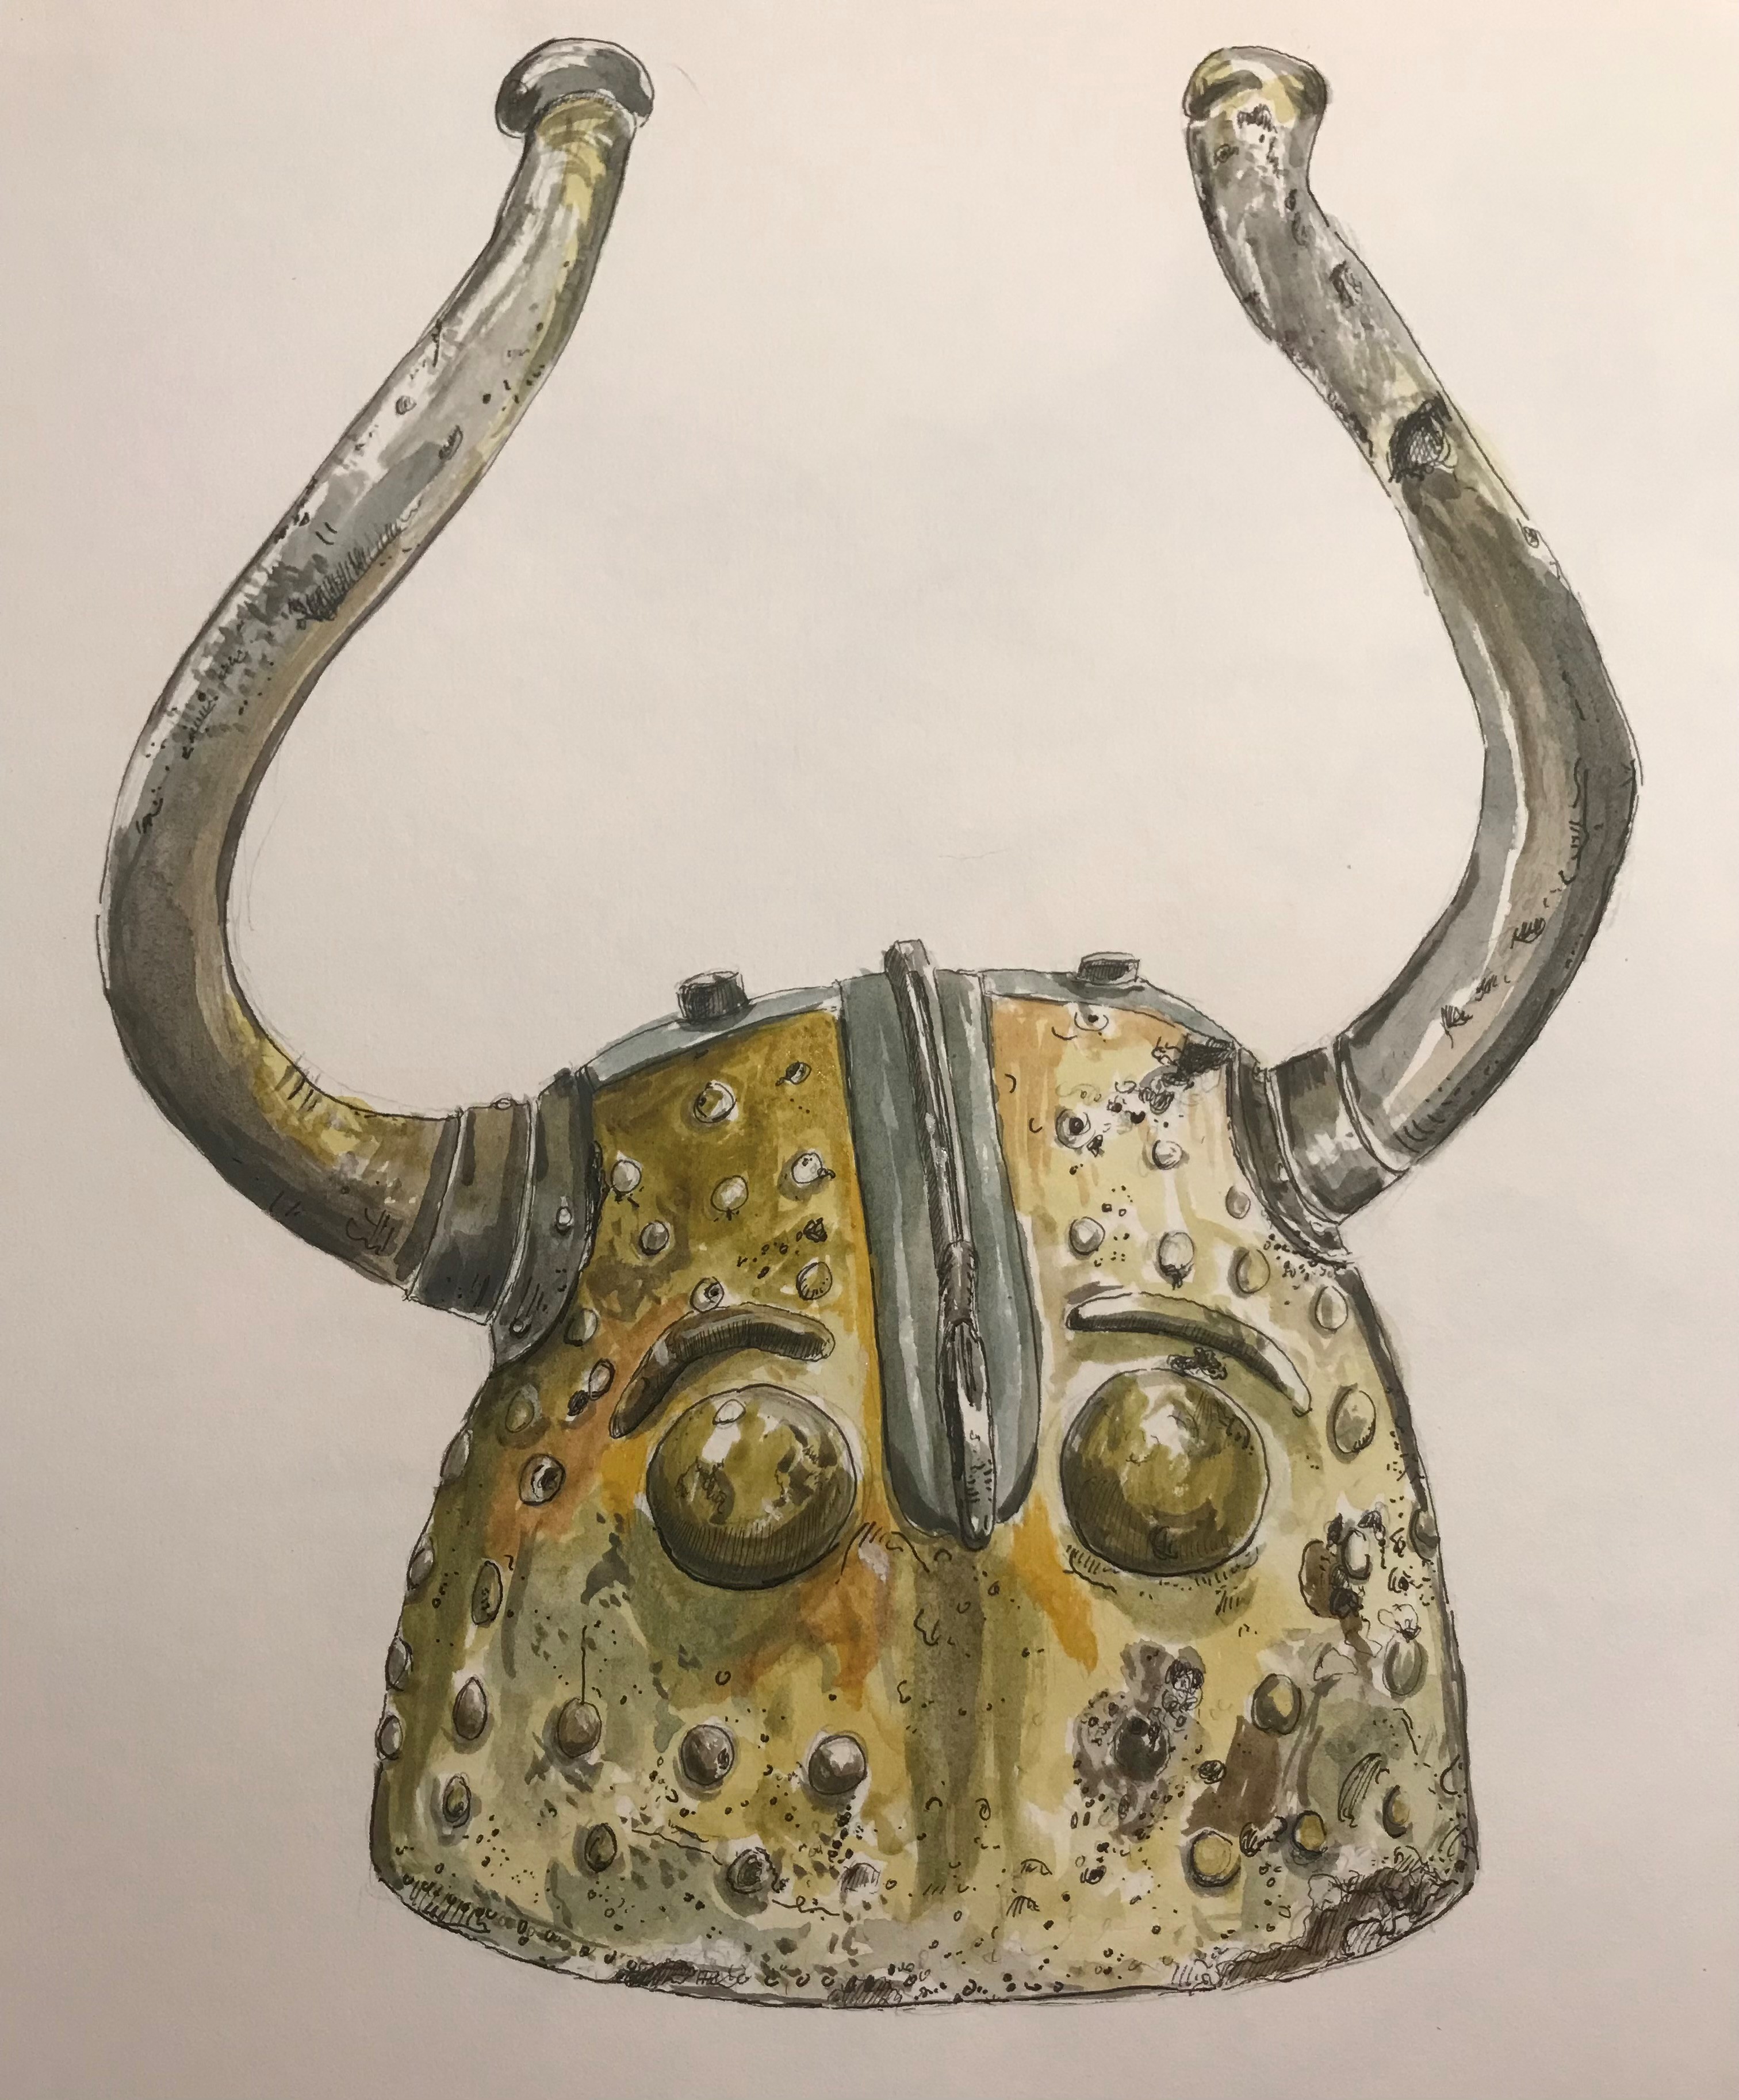 A watercolour painting of a helmet with horns